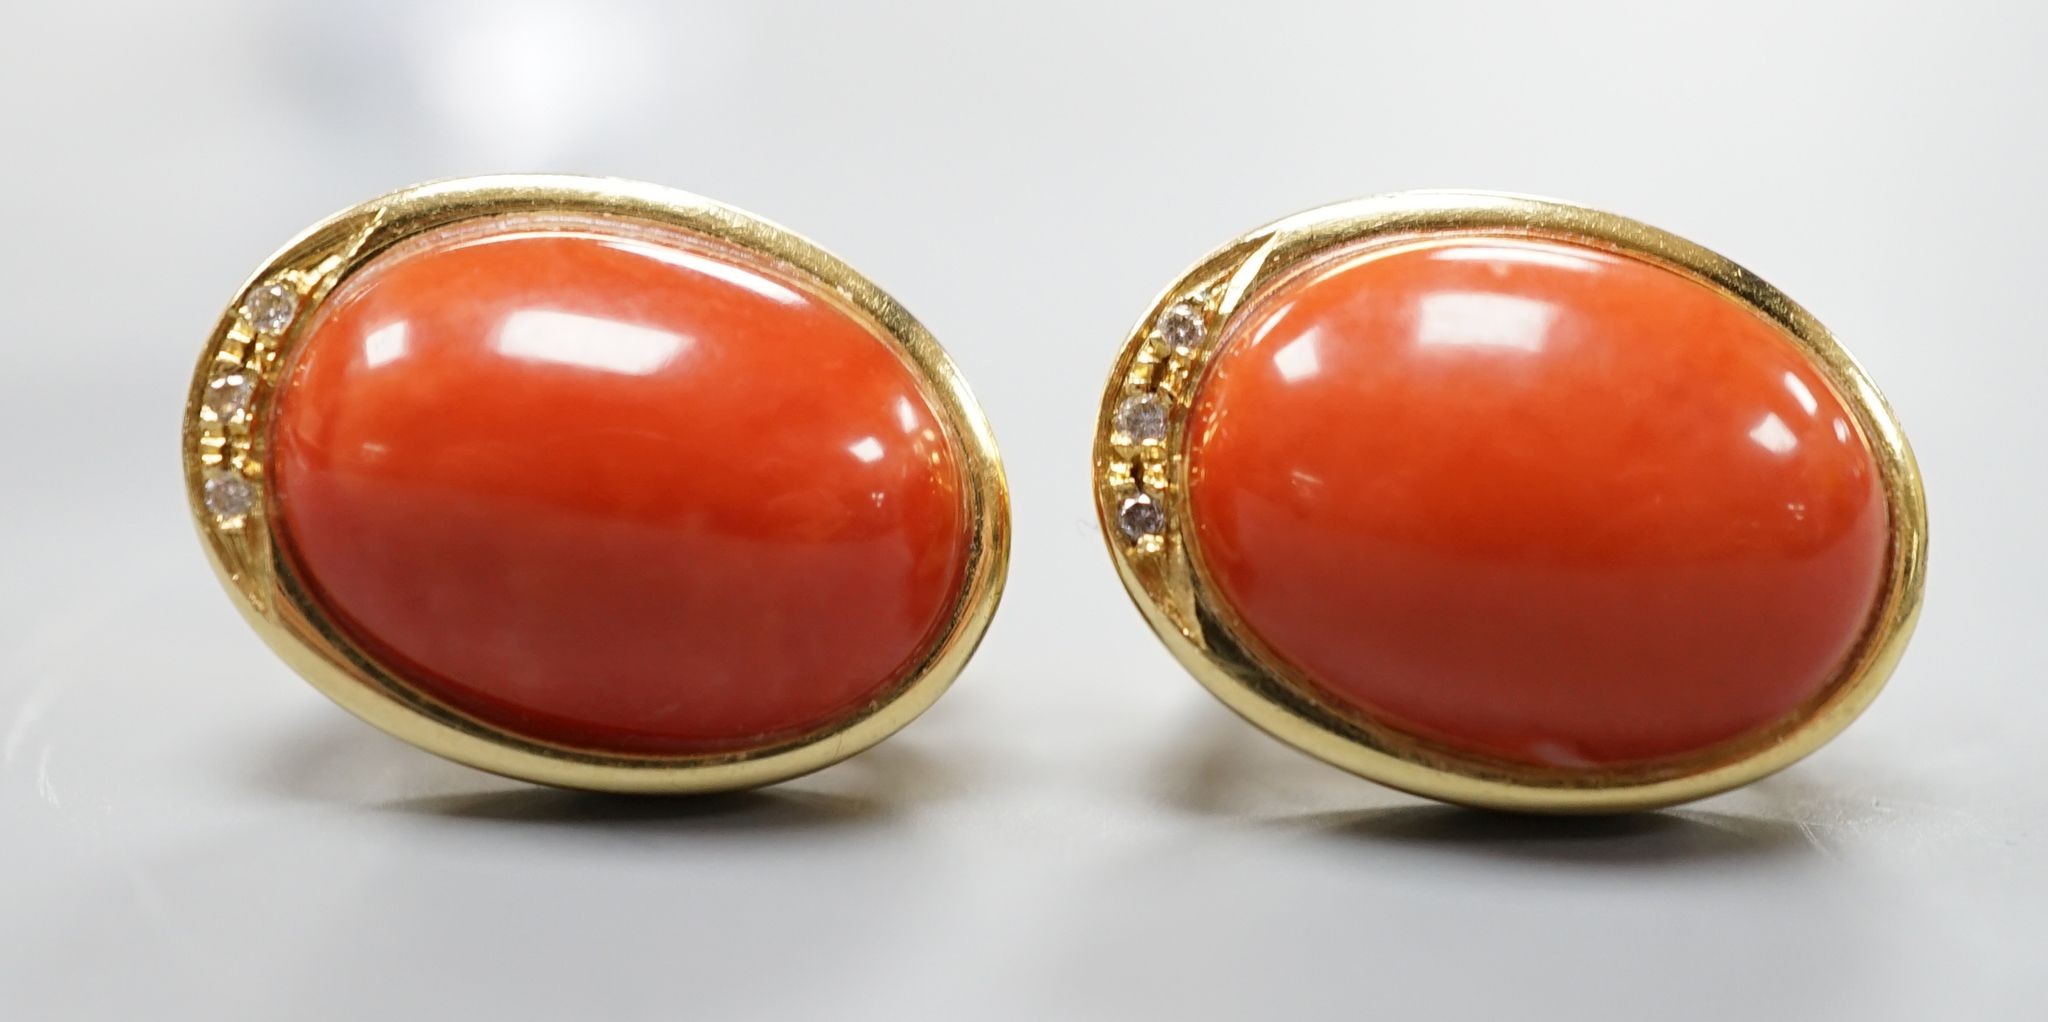 A pair of modern Italian 750 yellow metal a oval coral bead set earrings, 18mm, gross weight 11.7 grams.